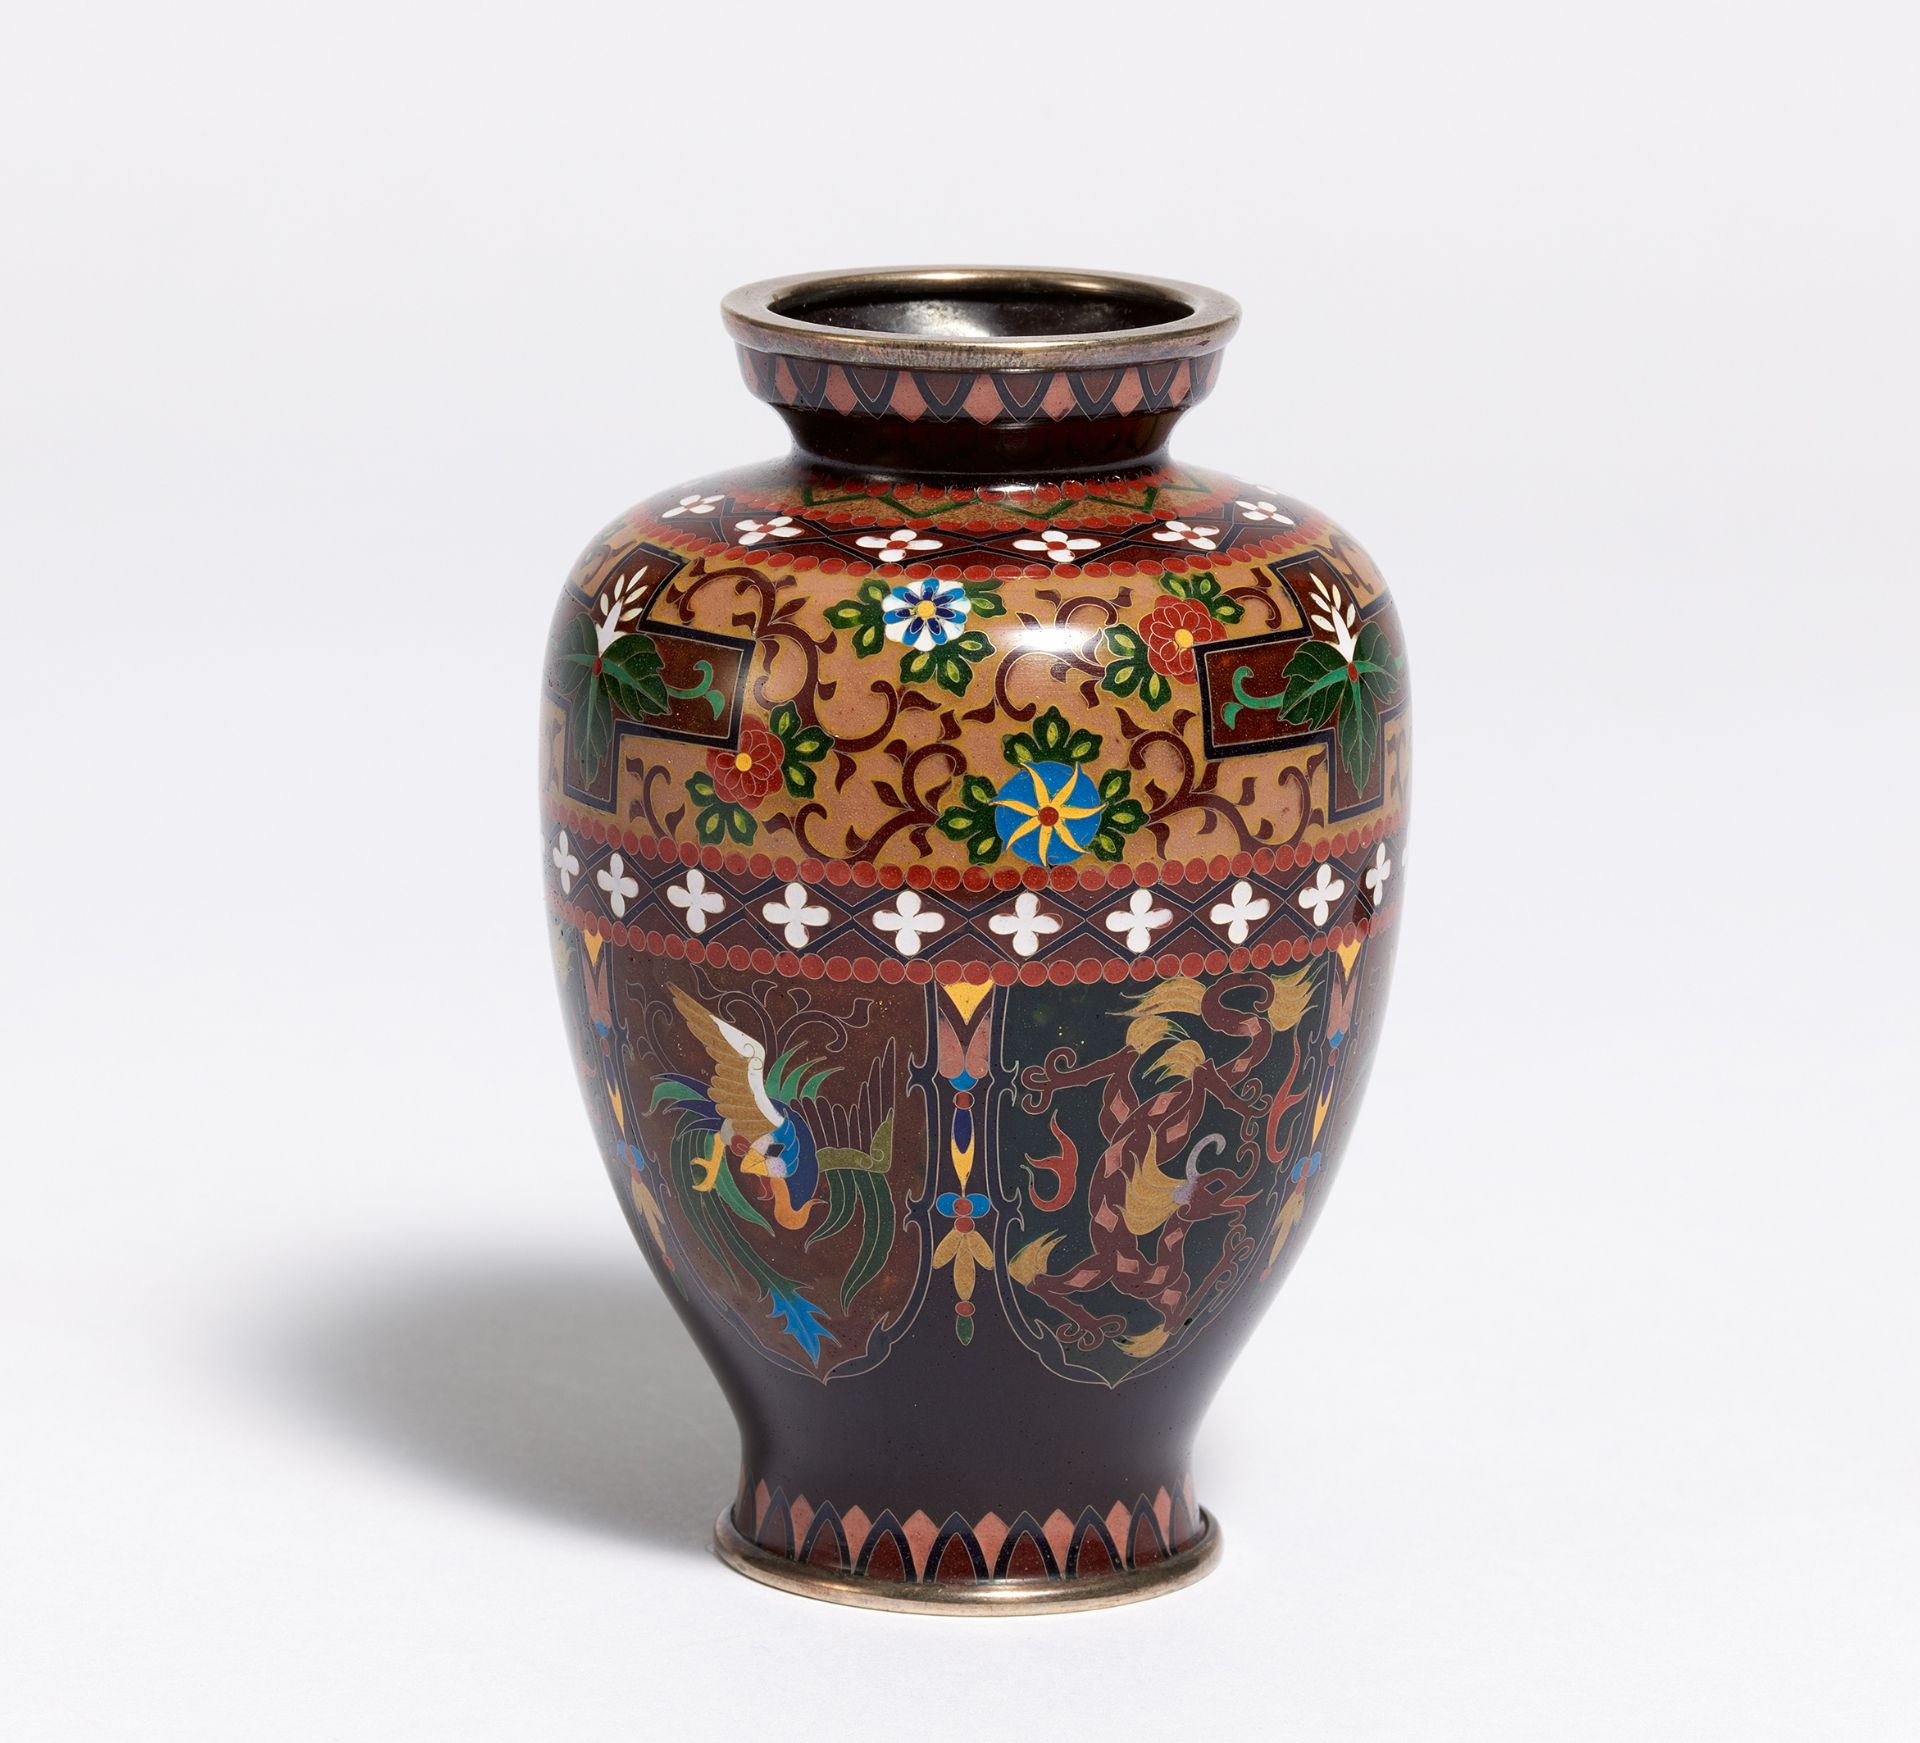 SMALL CLOISONNÉ VASE WITH KIRI FLOWERS, PHOENIX AND DRAGONS. Japan. Meiji period. Late 19th c.